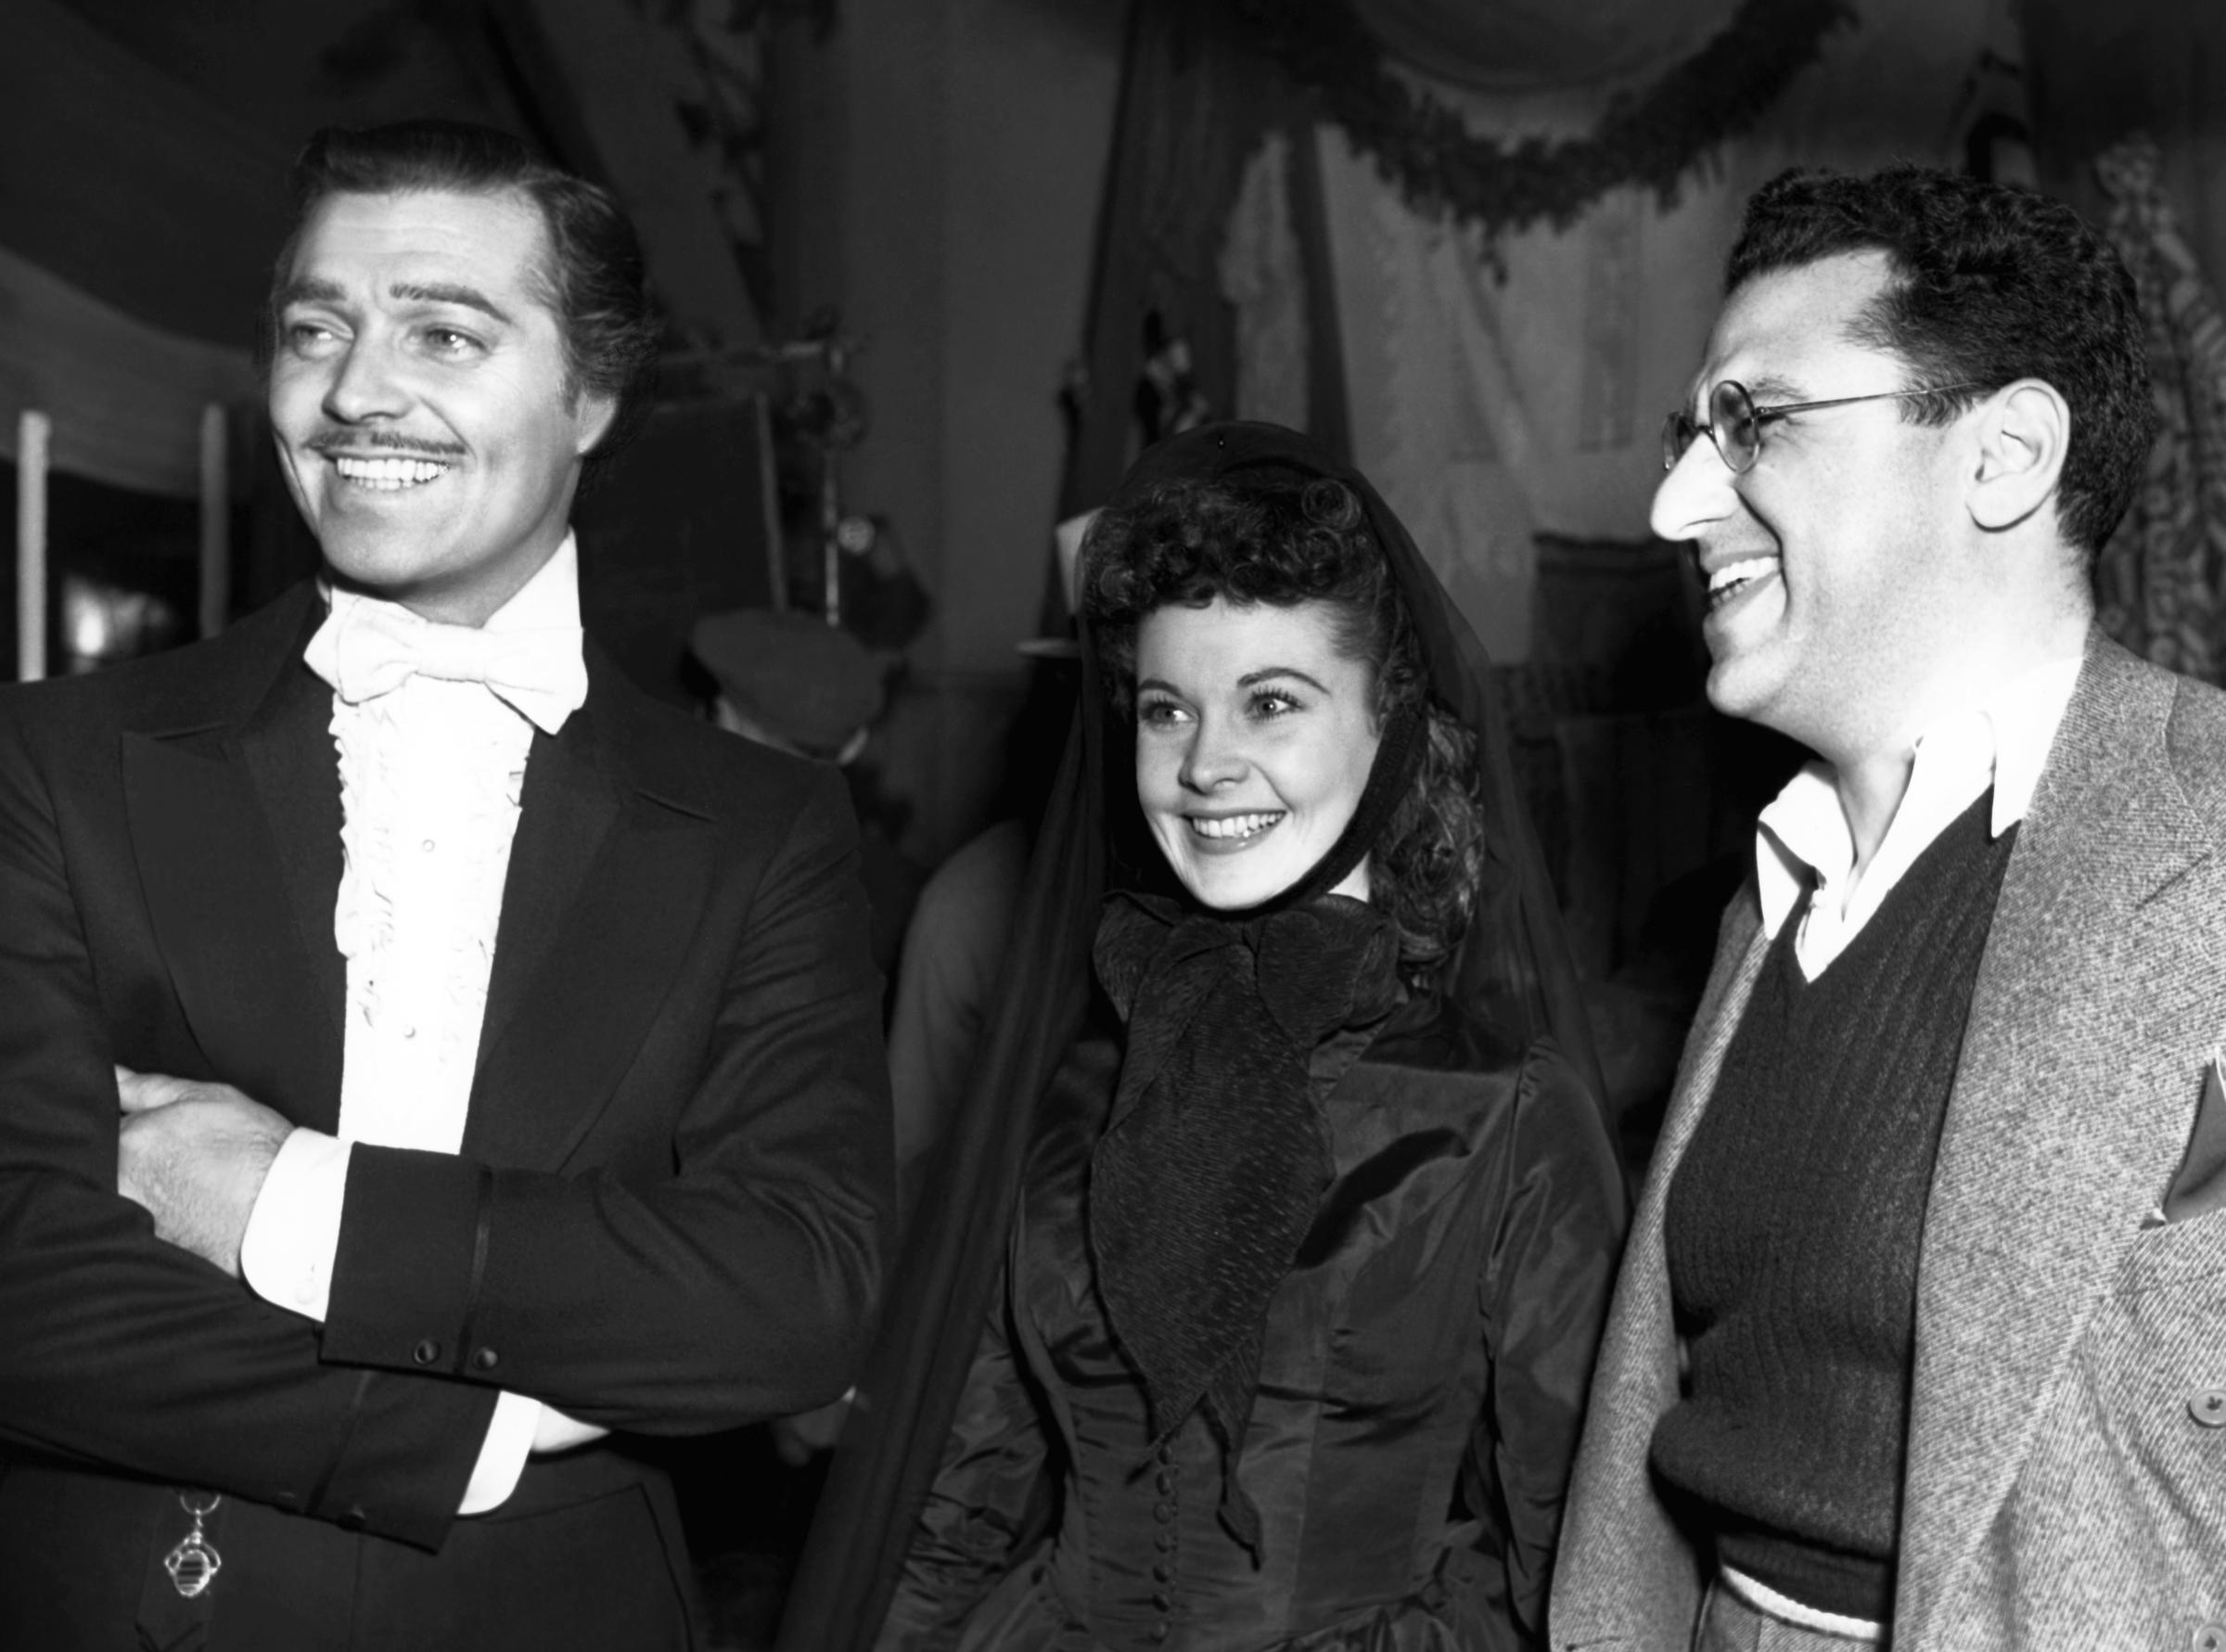 From left: Clark Gable, Vivien Leigh and producer David O. Selznick on the set of Gone with the Wind in 1939.